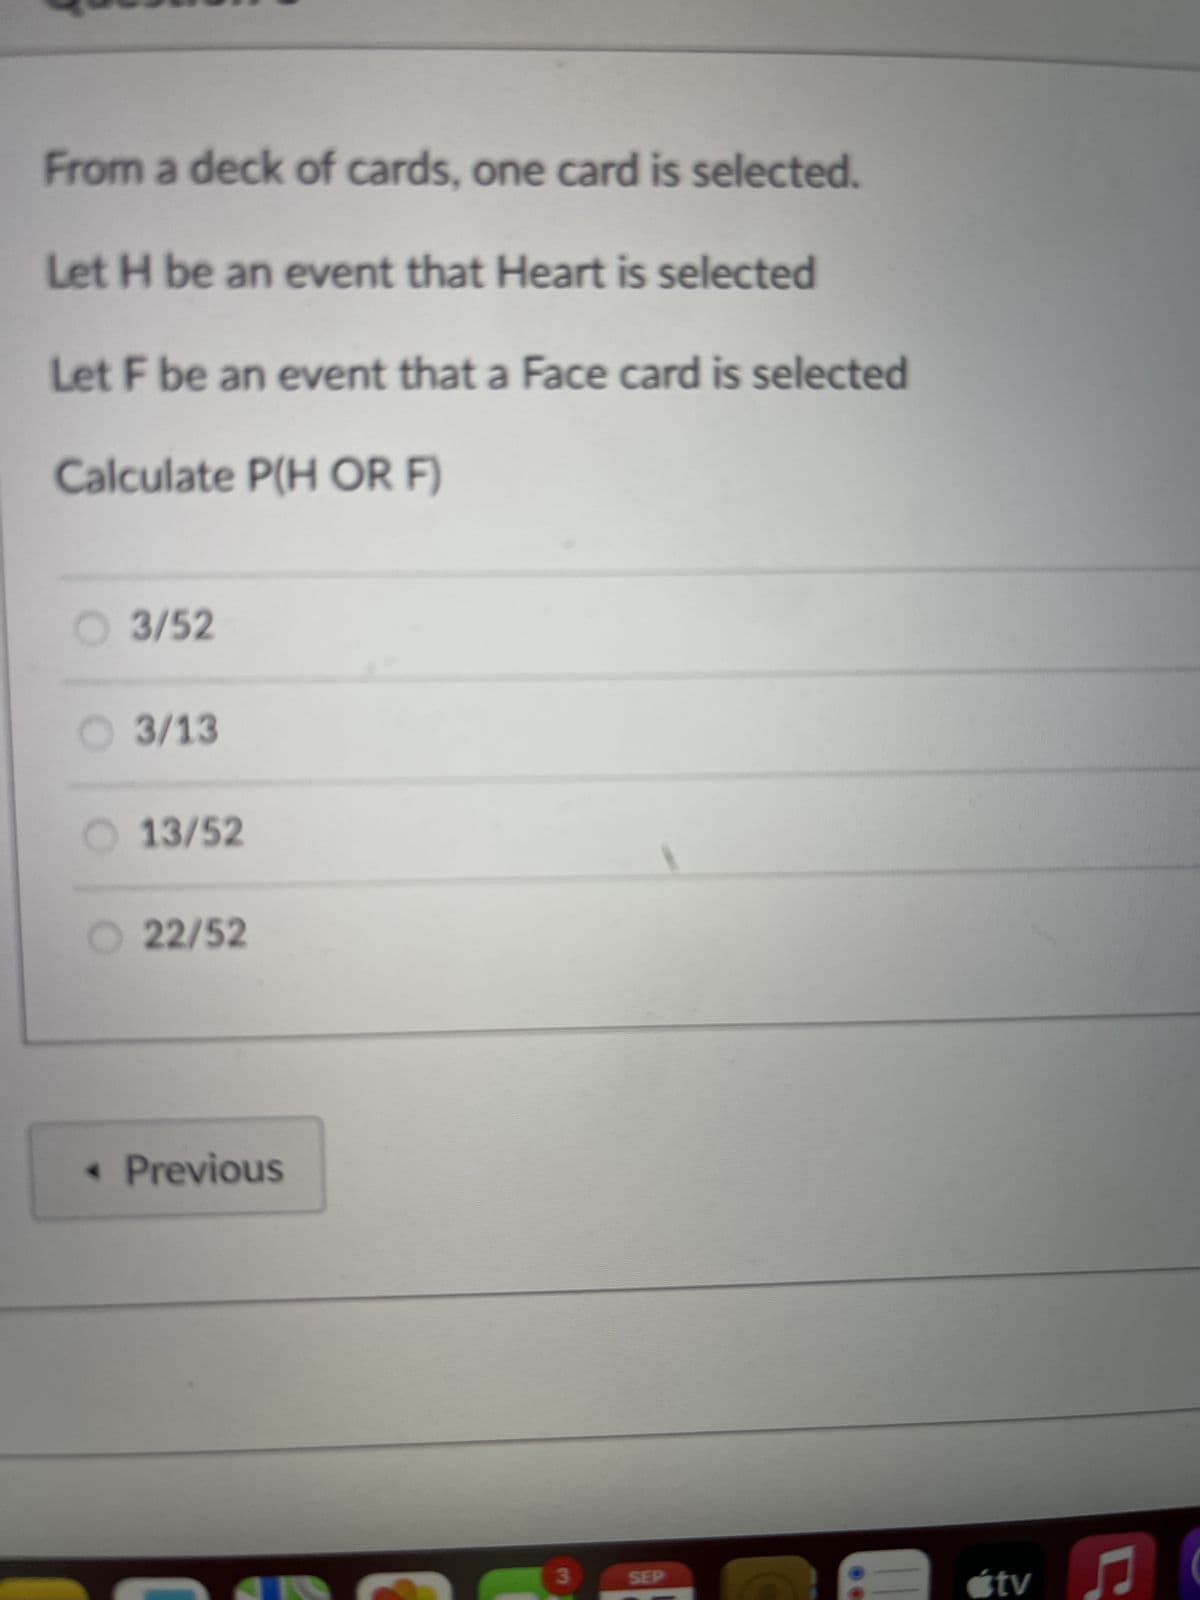 From a deck of cards, one card is selected.
Let H be an event that Heart is selected
Let F be an event that a Face card is selected
Calculate P(H OR F)
3/52
3/13
13/52
22/52
< Previous
3
SEP
tv
♫